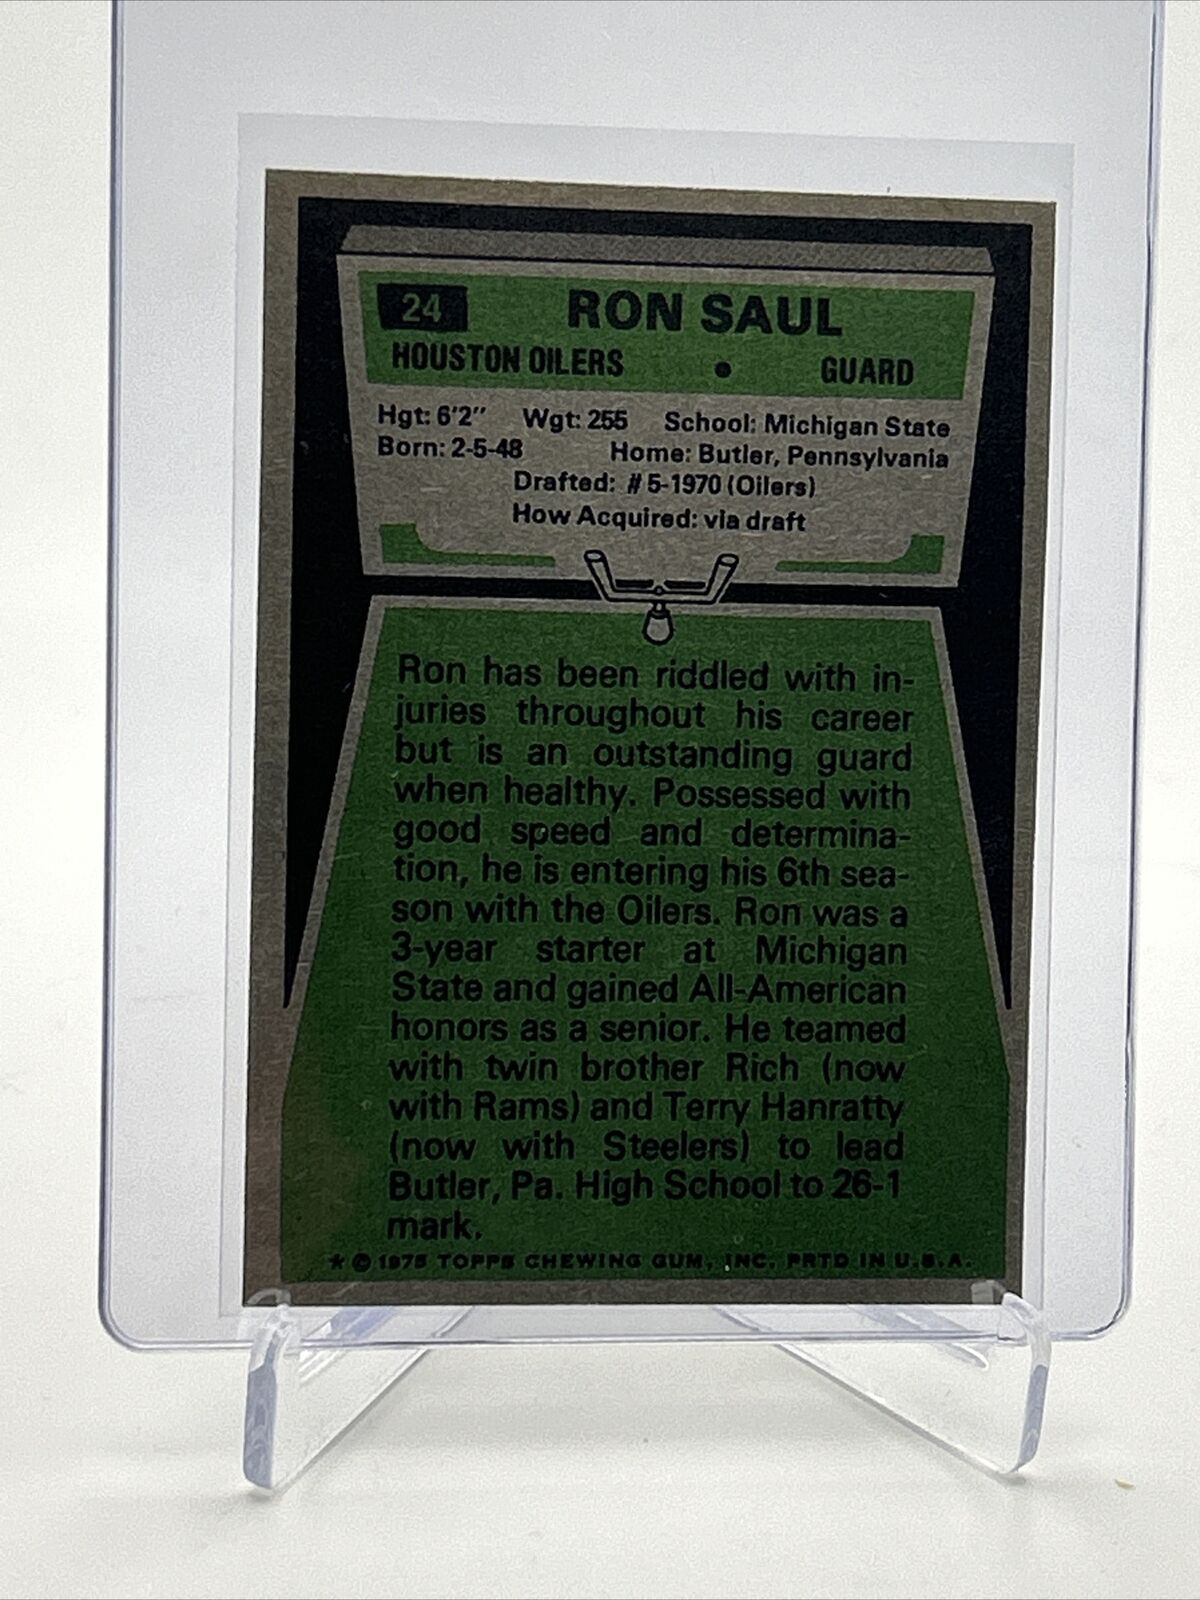 1975 Topps Ron Saul Football Card #24 NM Quality FREE SHIPPING